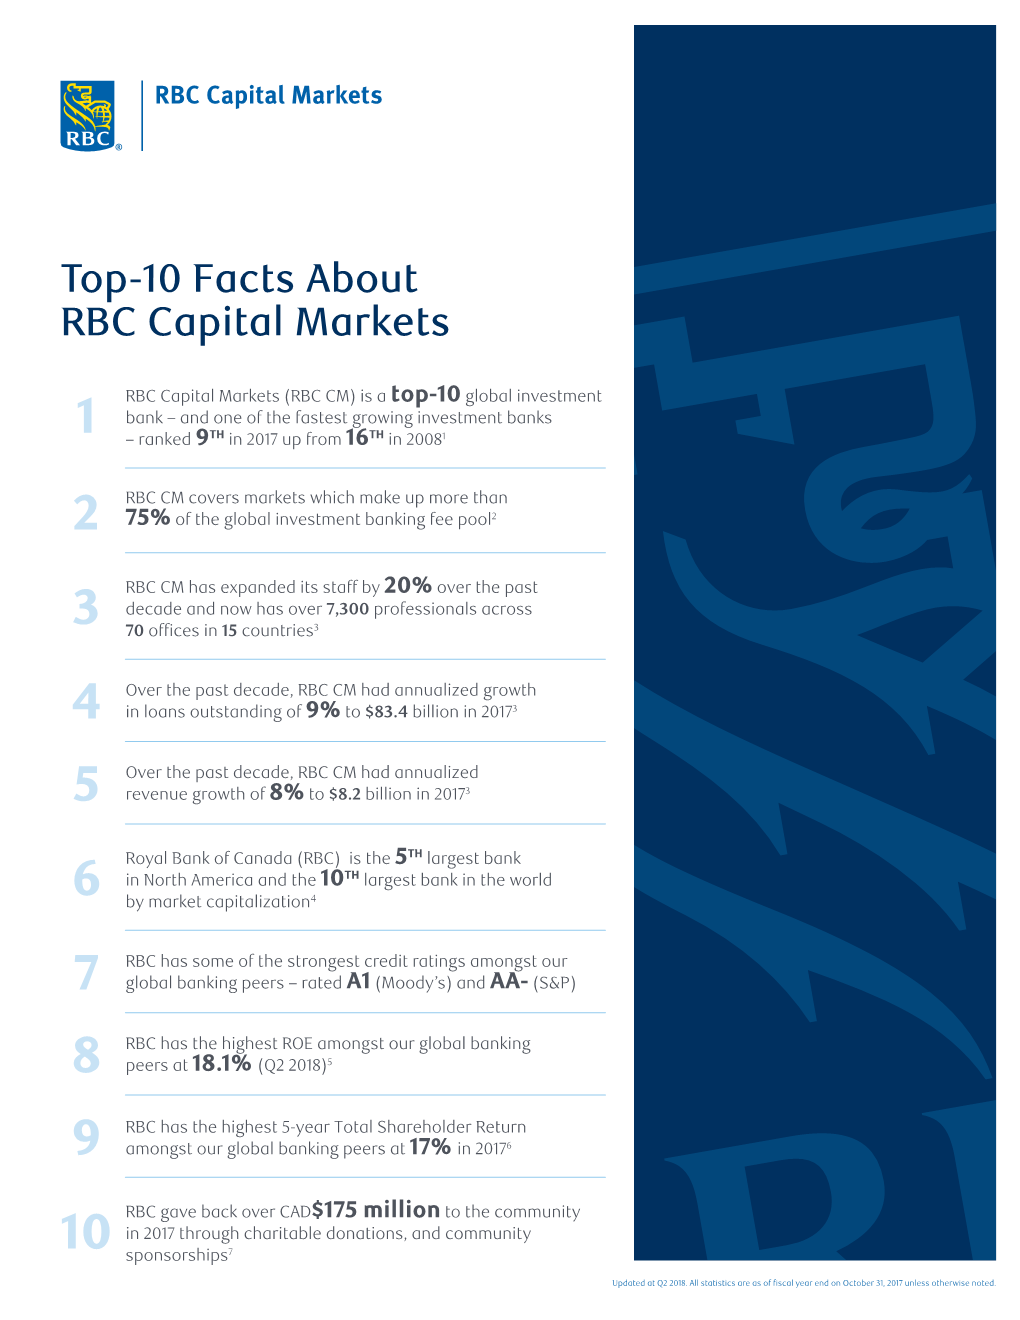 Top-10 Facts About RBC Capital Markets